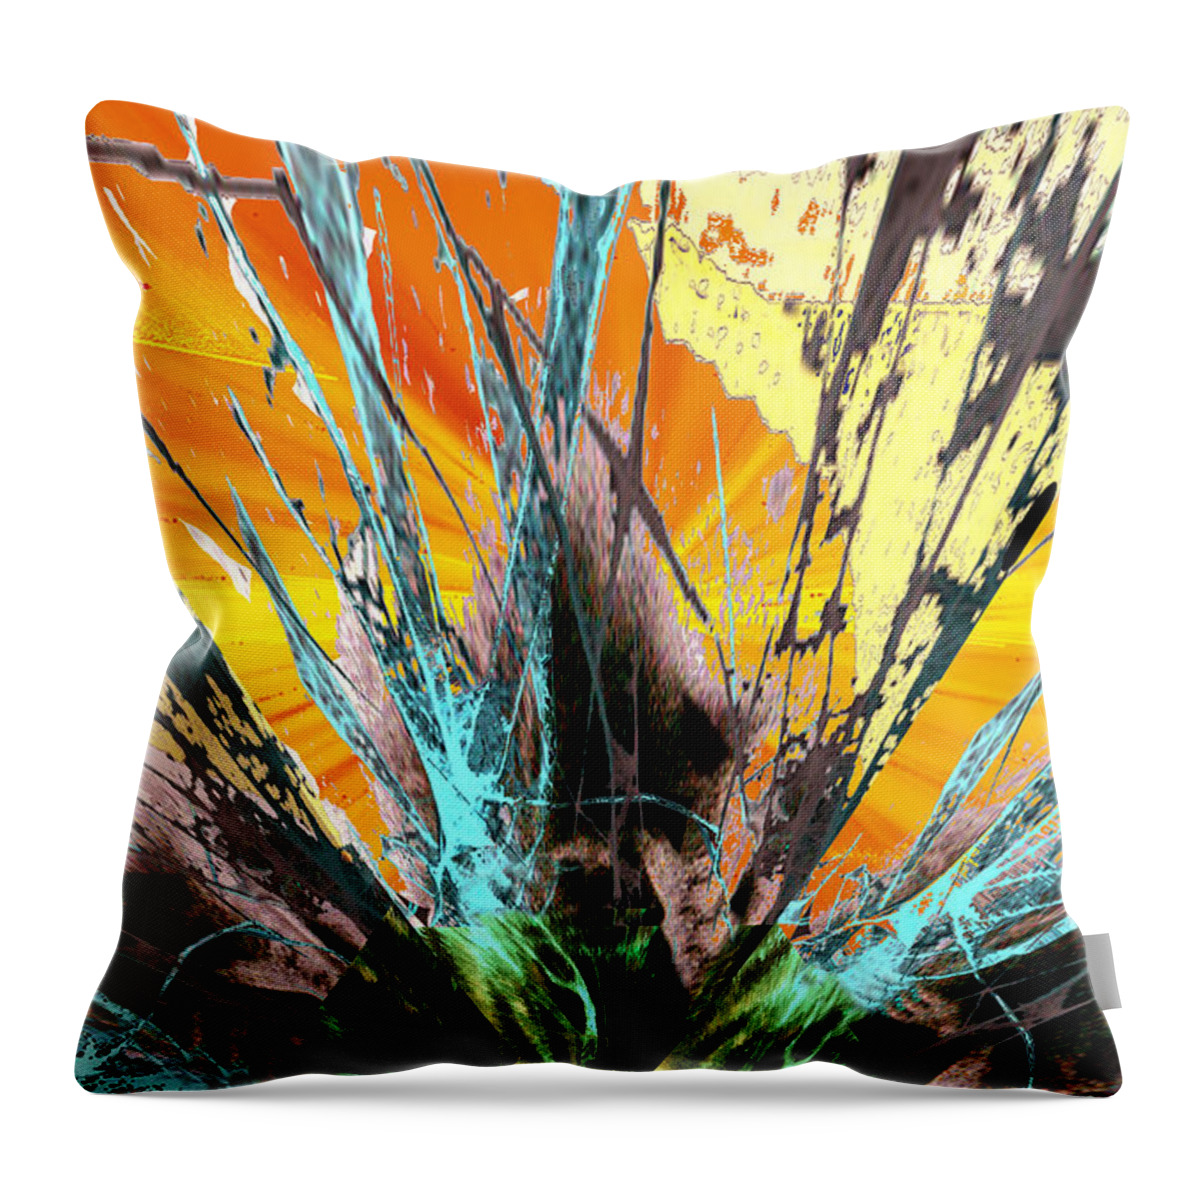 Fractured Sunset Throw Pillow featuring the digital art Fractured Sunset by Seth Weaver